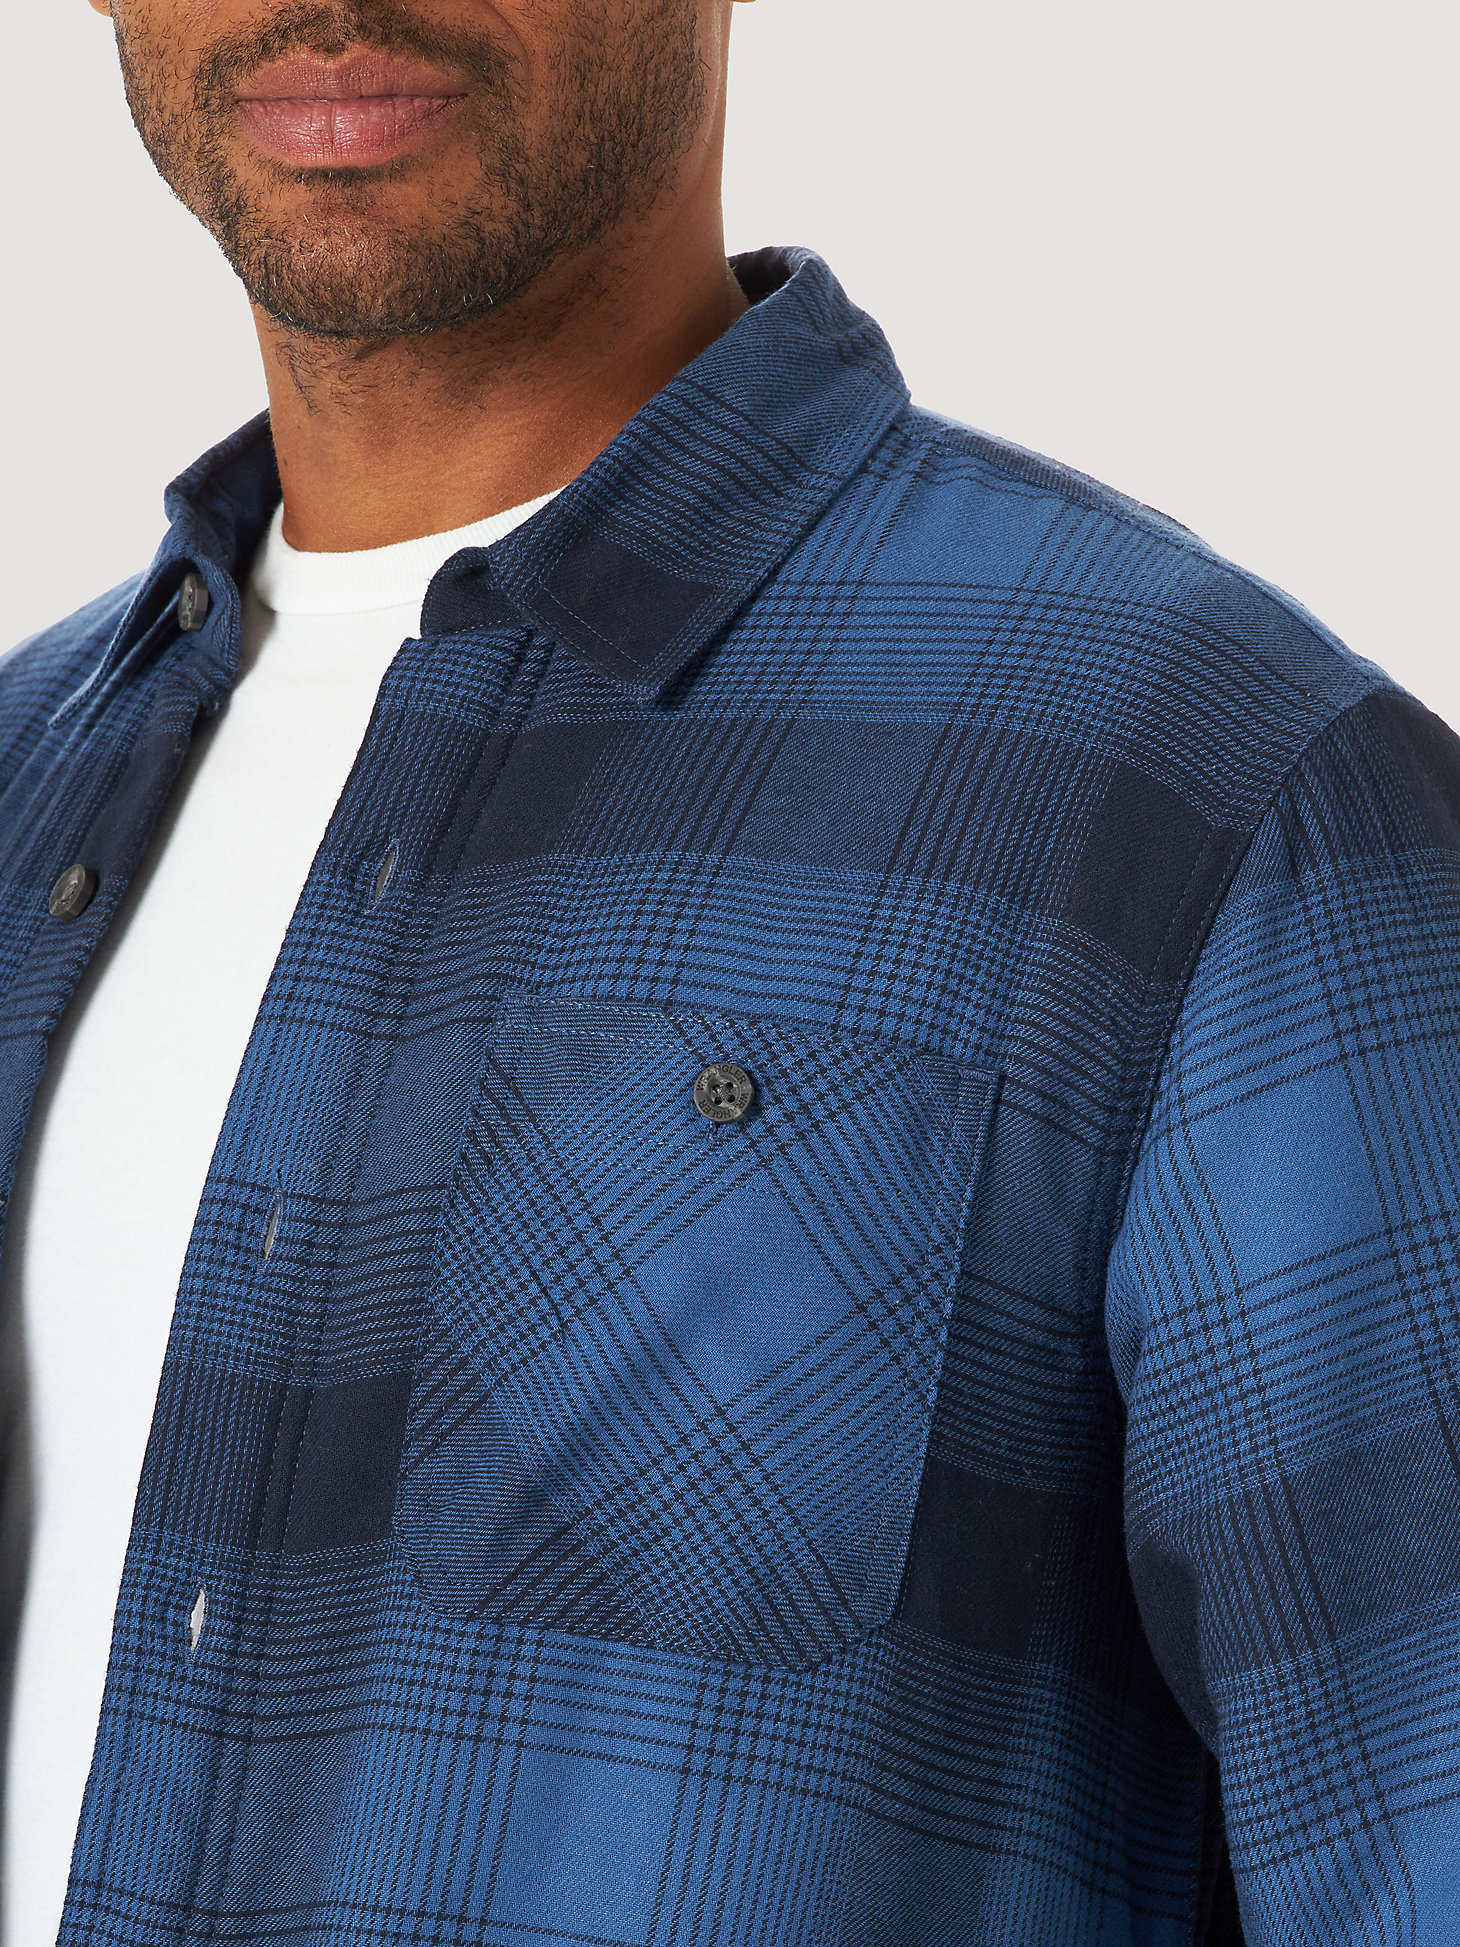 Men's Wrangler® Authentics Sherpa Lined Flannel Shirt in Blue alternative view 2